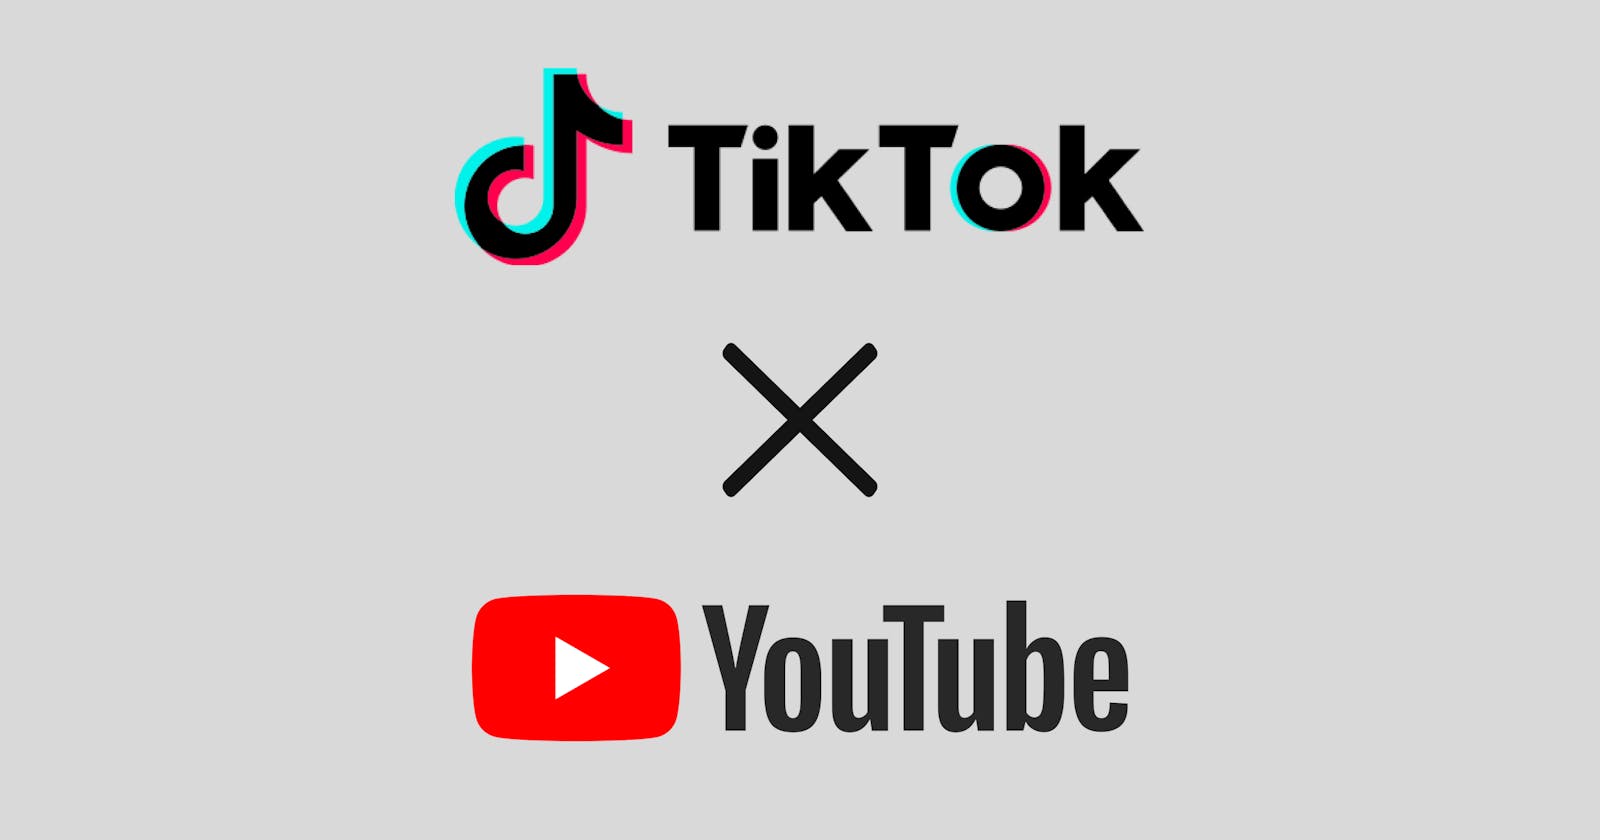 How to grow a YouTube channel from a TikTok scraper # 2